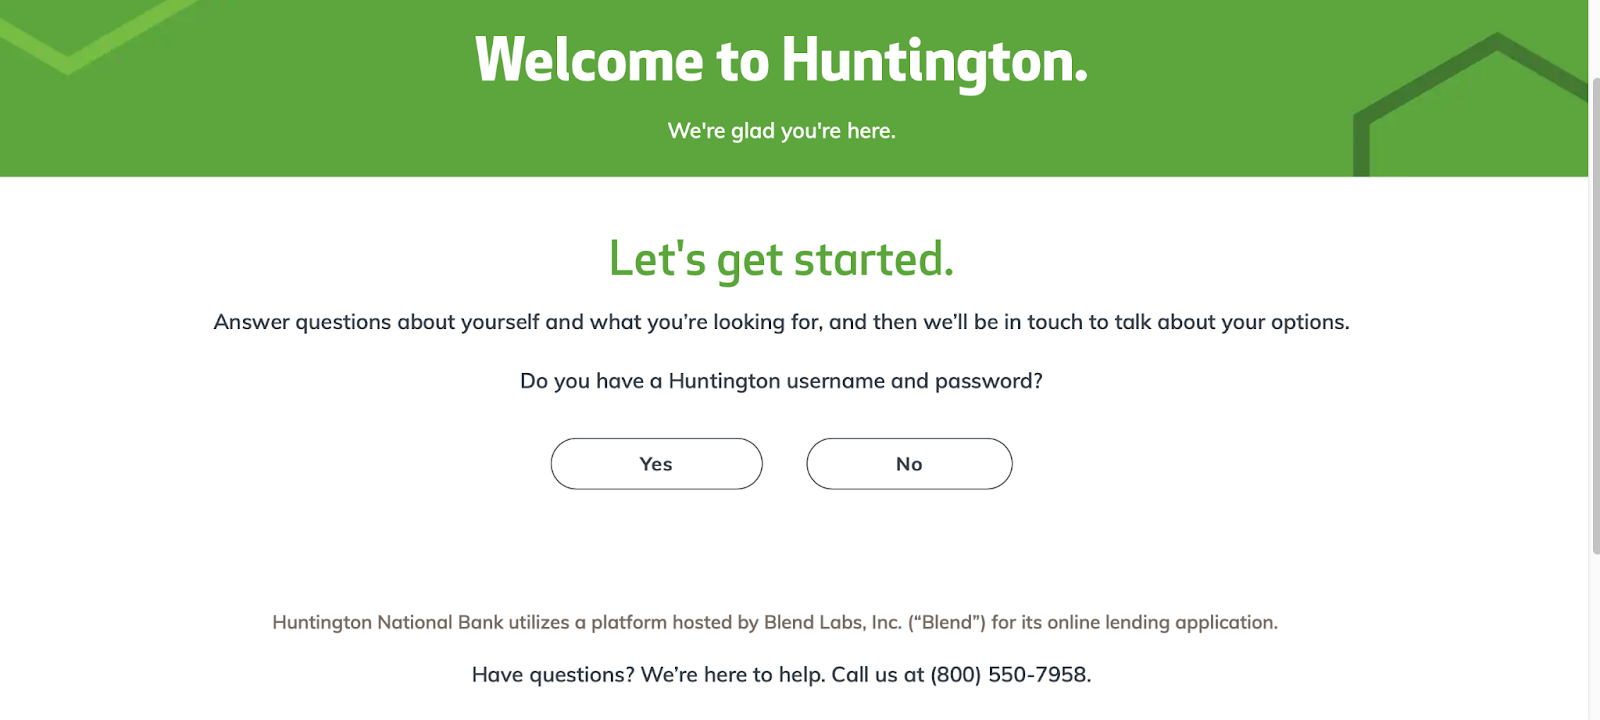 Screesnhot of getting started on Huntington Personal Loan application